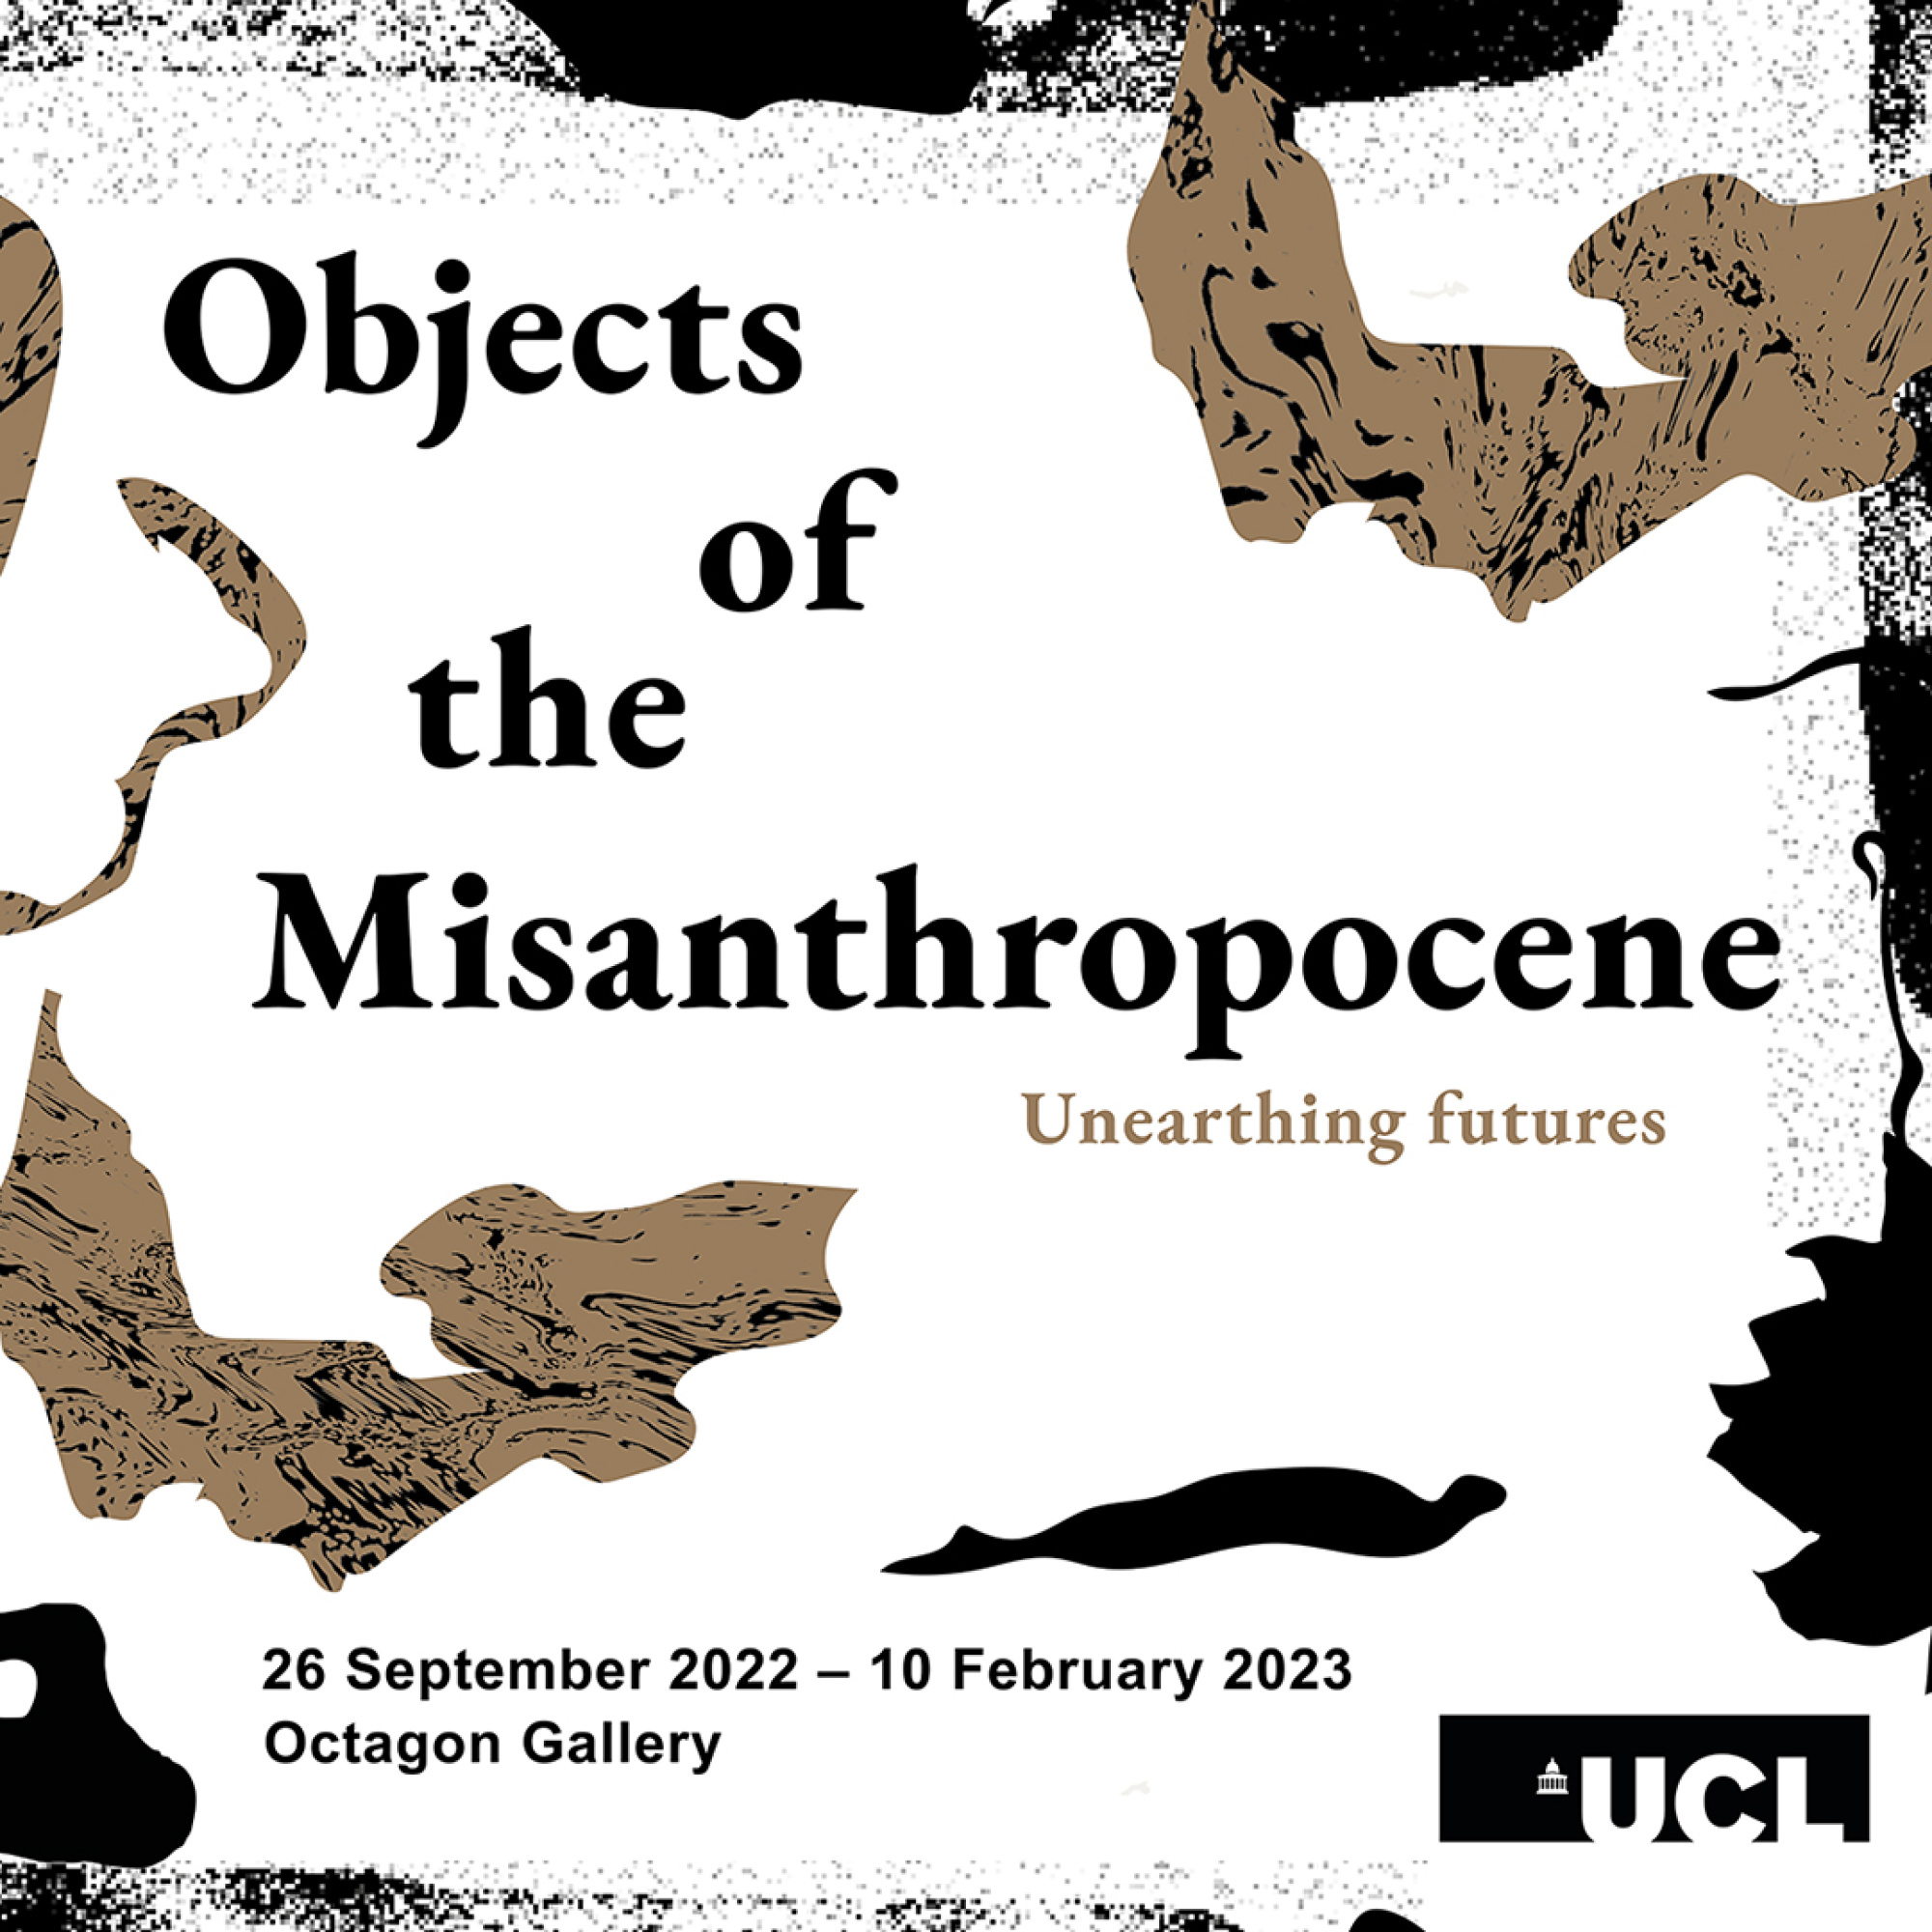 Poster, Objects of the Misanthropocene - Octagon Gallery, September 2022